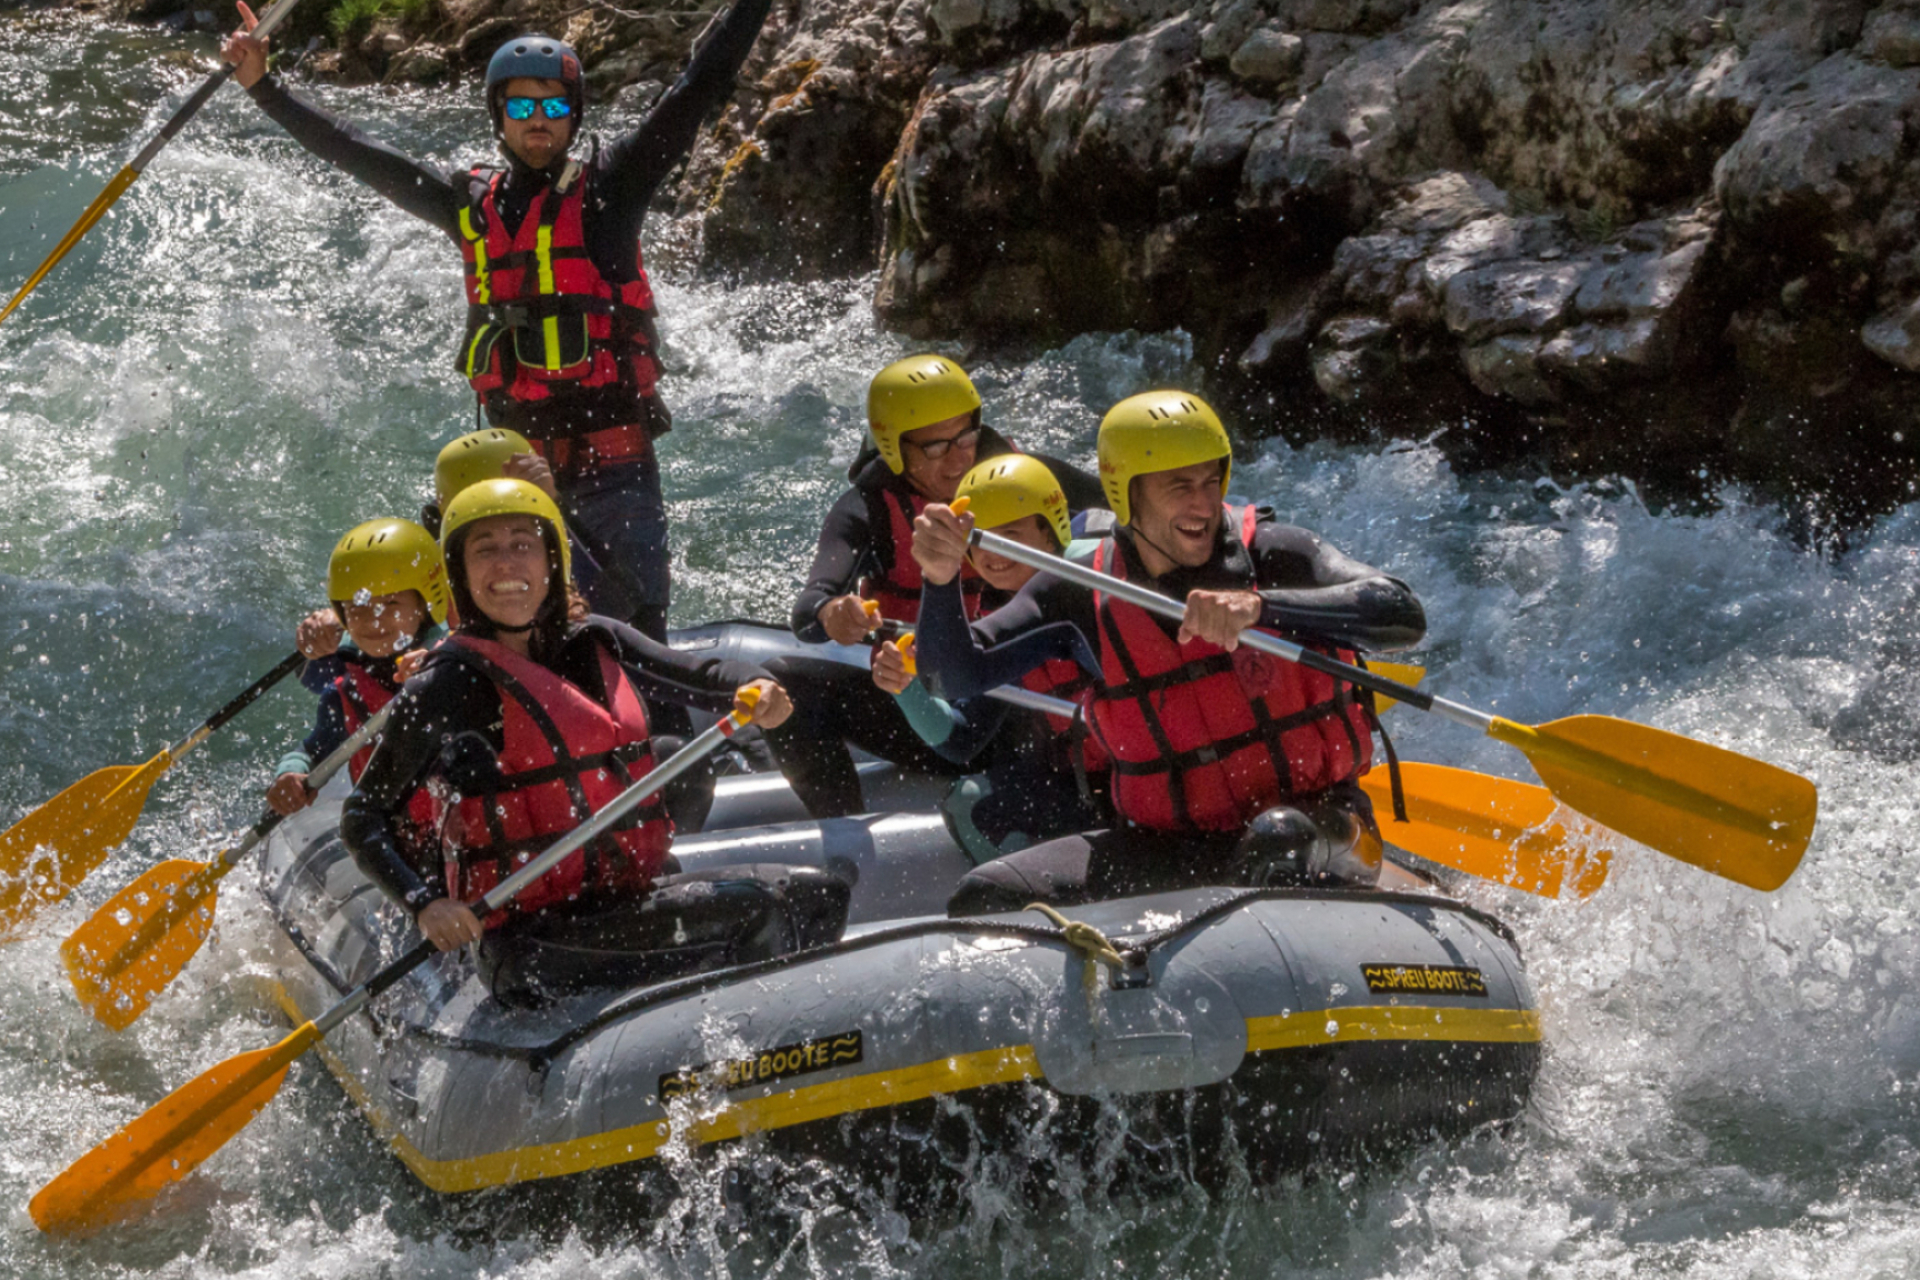 Rafting: Rafters move through intense and powerful water rapids. 1920x1280 HD Wallpaper.